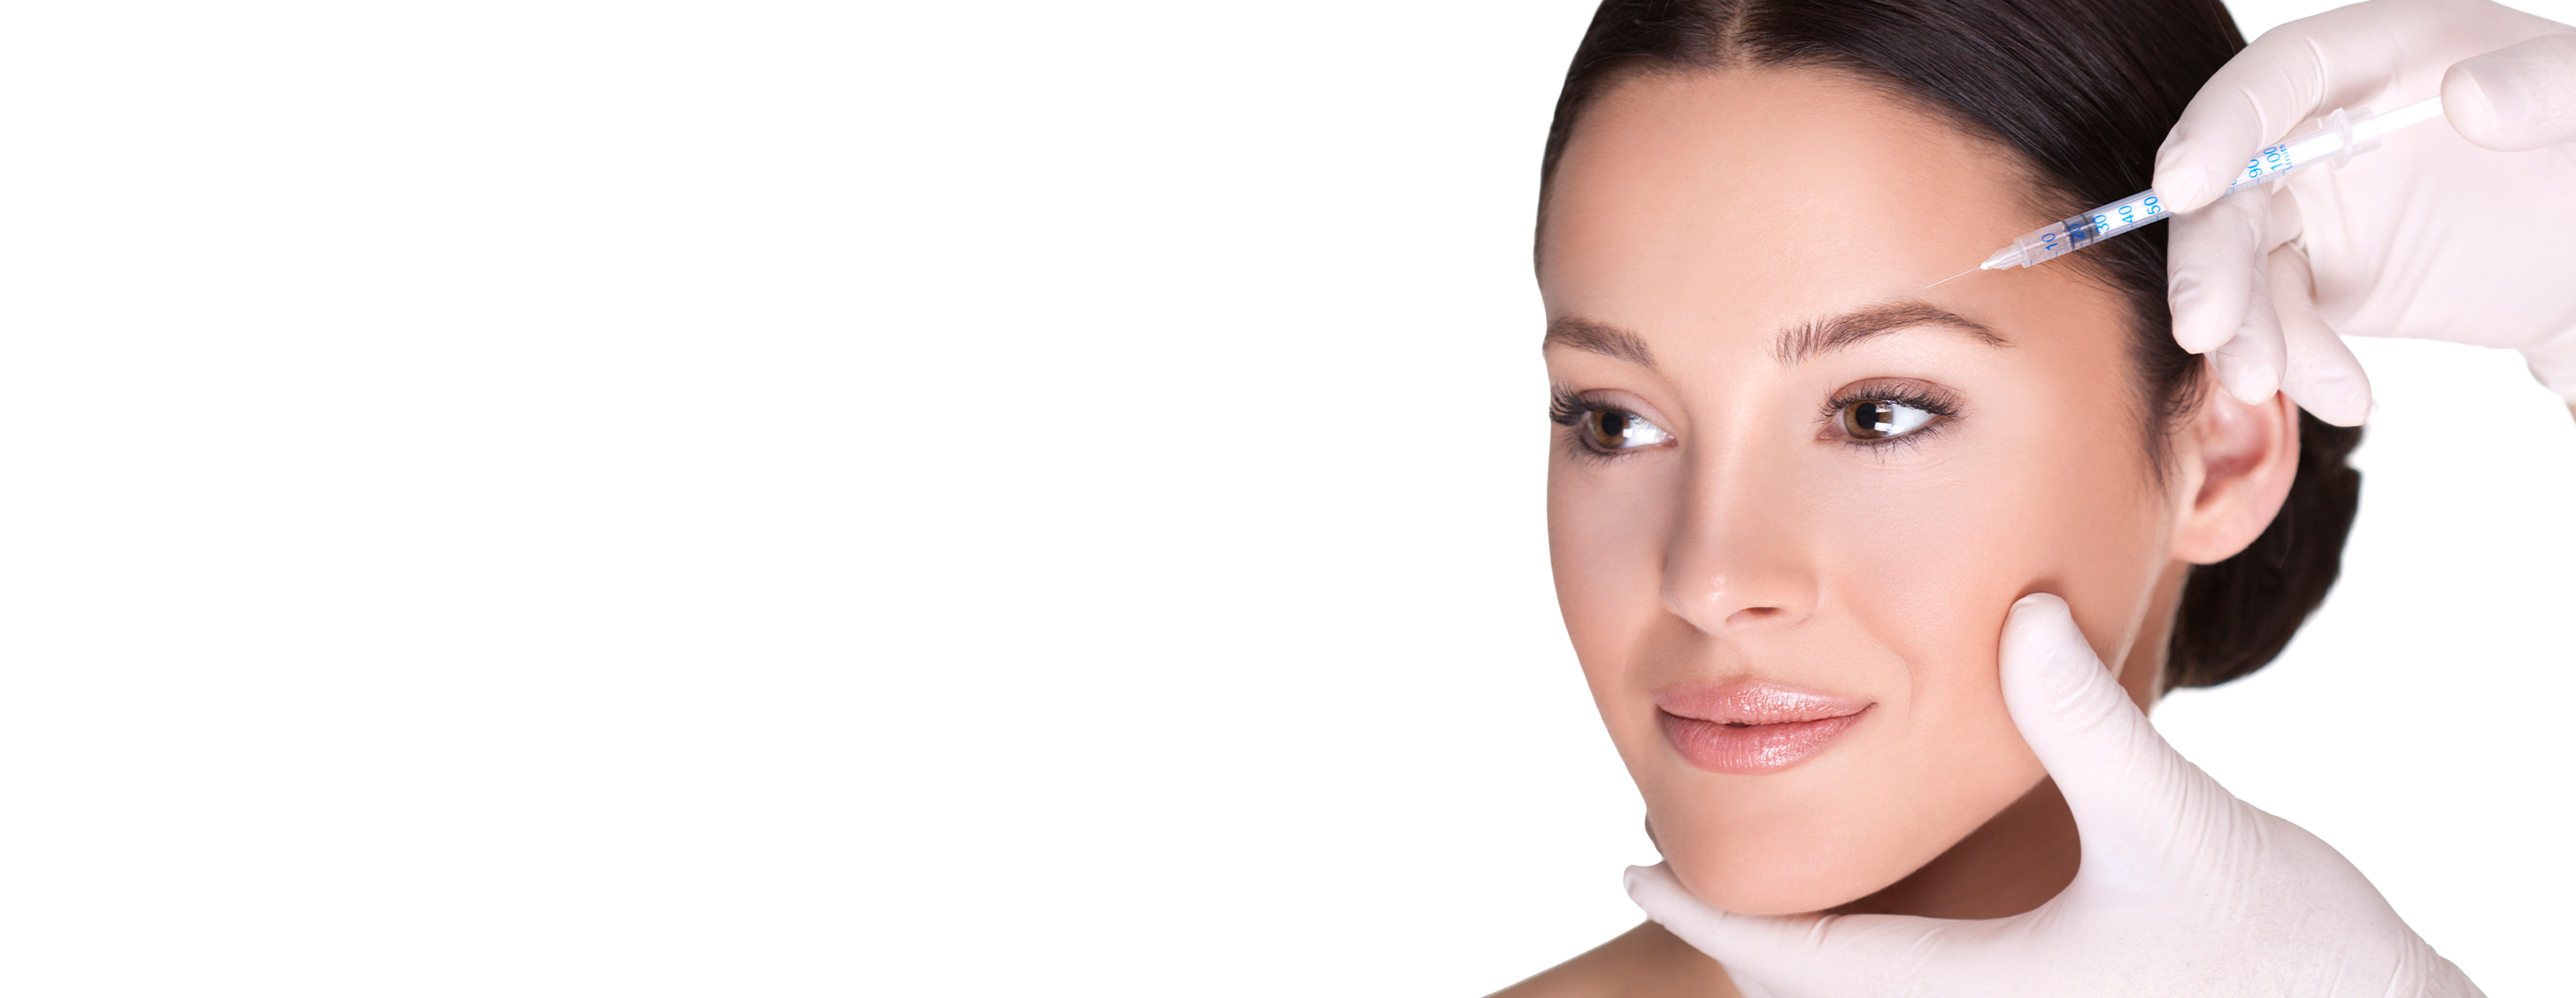 ZL Medspa Blog | Why non-surgical eye and brow lifts are game changers